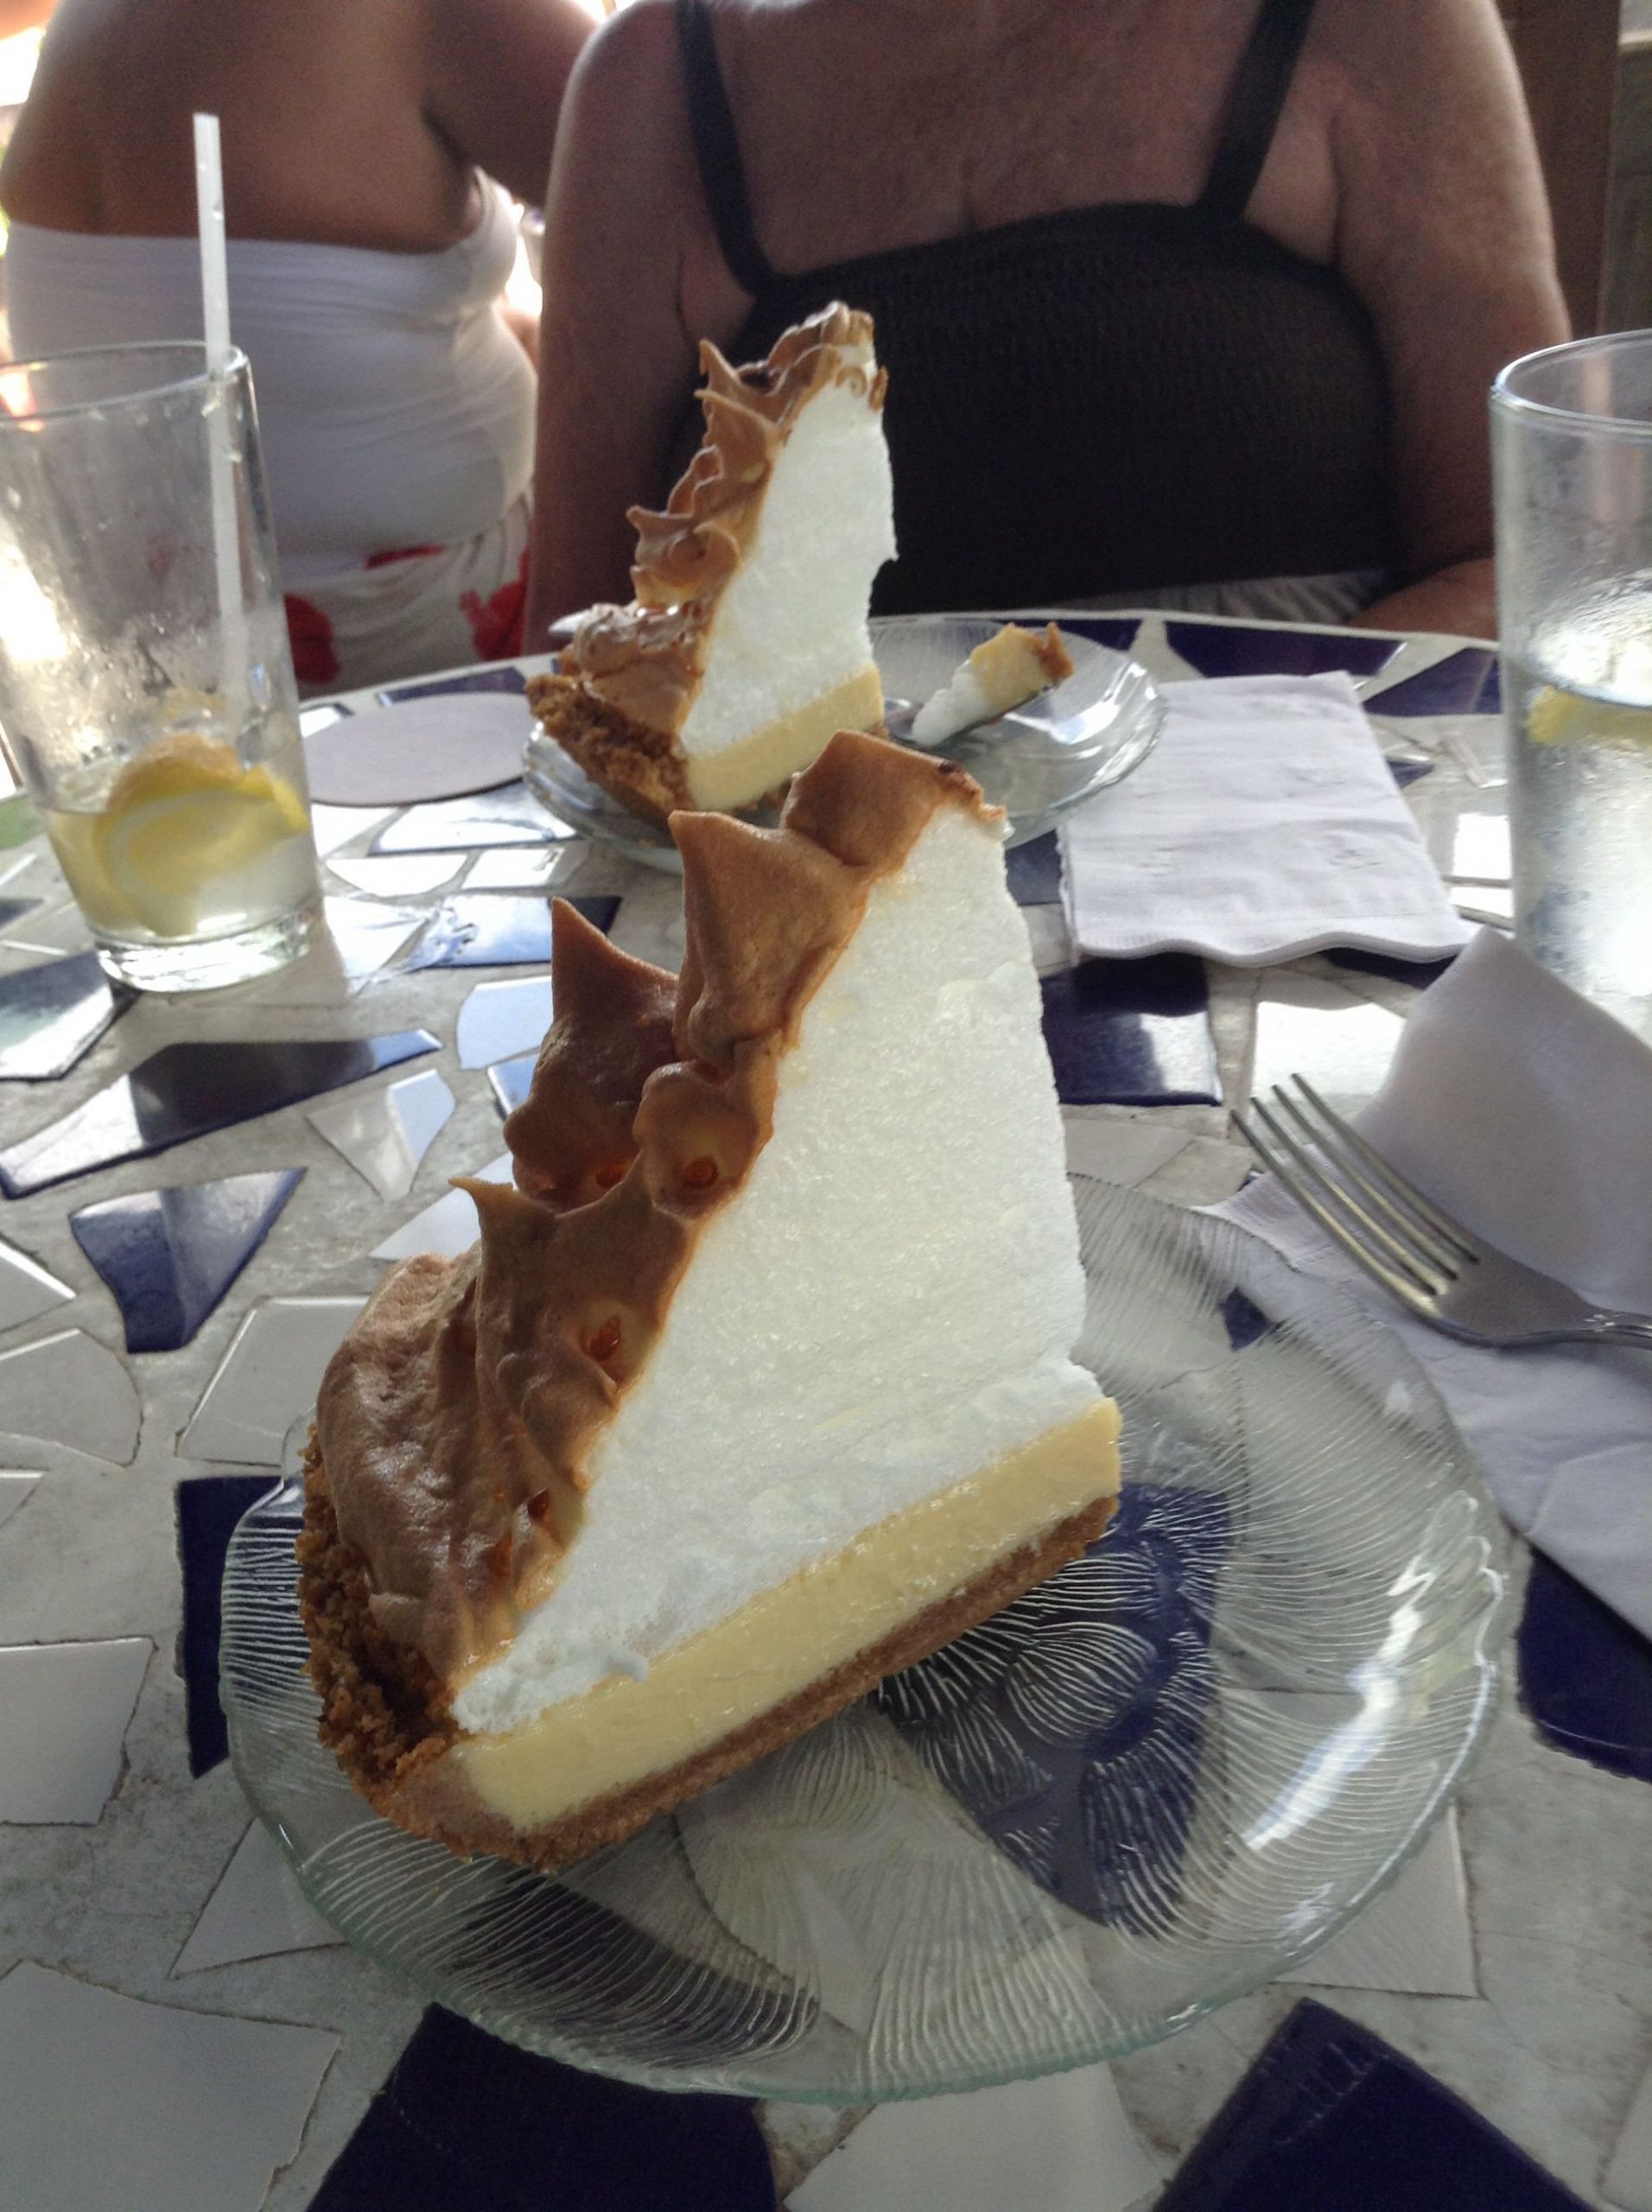 15 Of the Best Real Simple Dessert Key West Ever